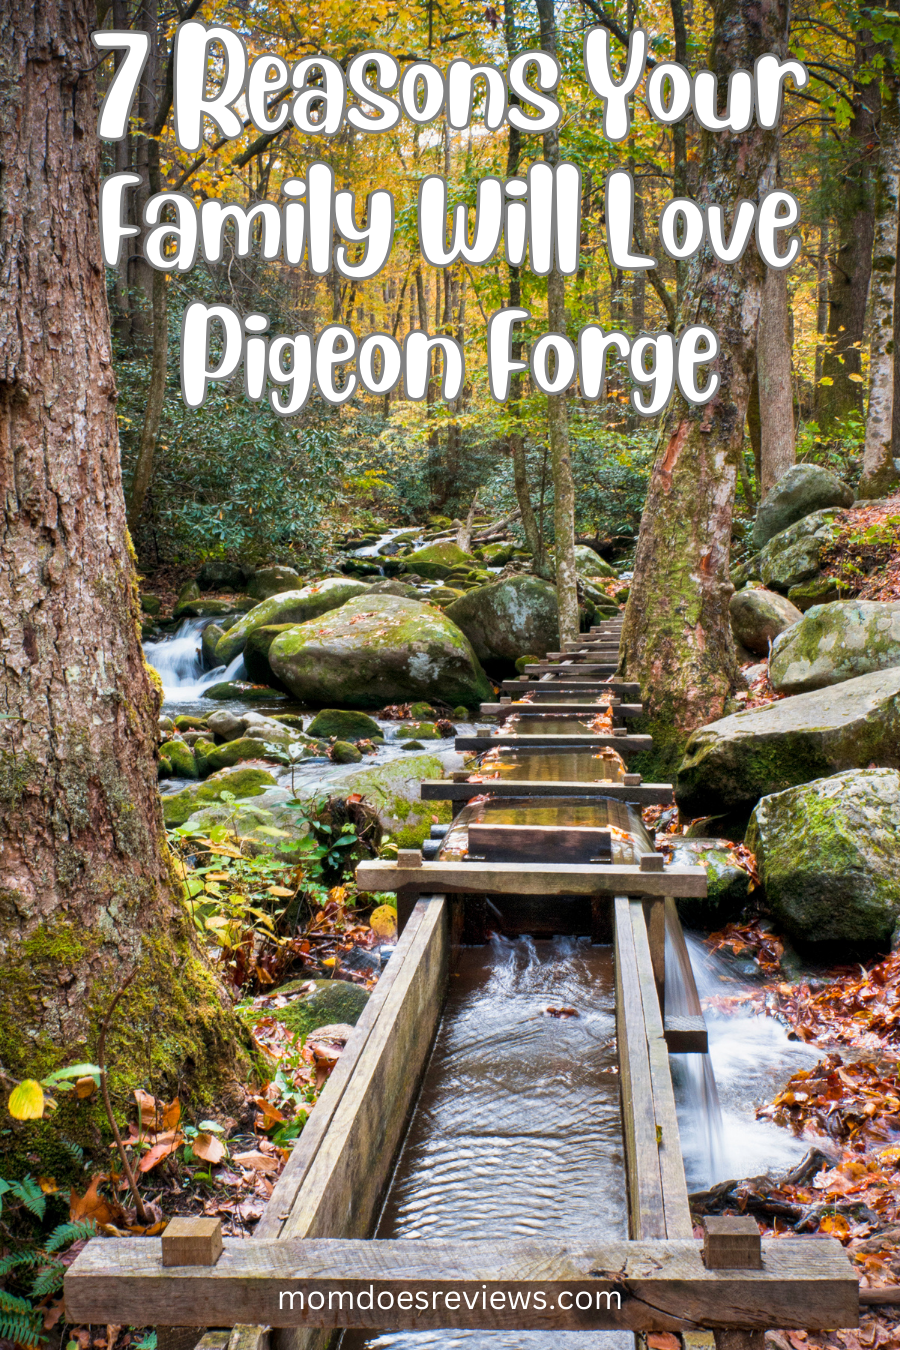 7 Reasons Your Family Will Love Pigeon Forge